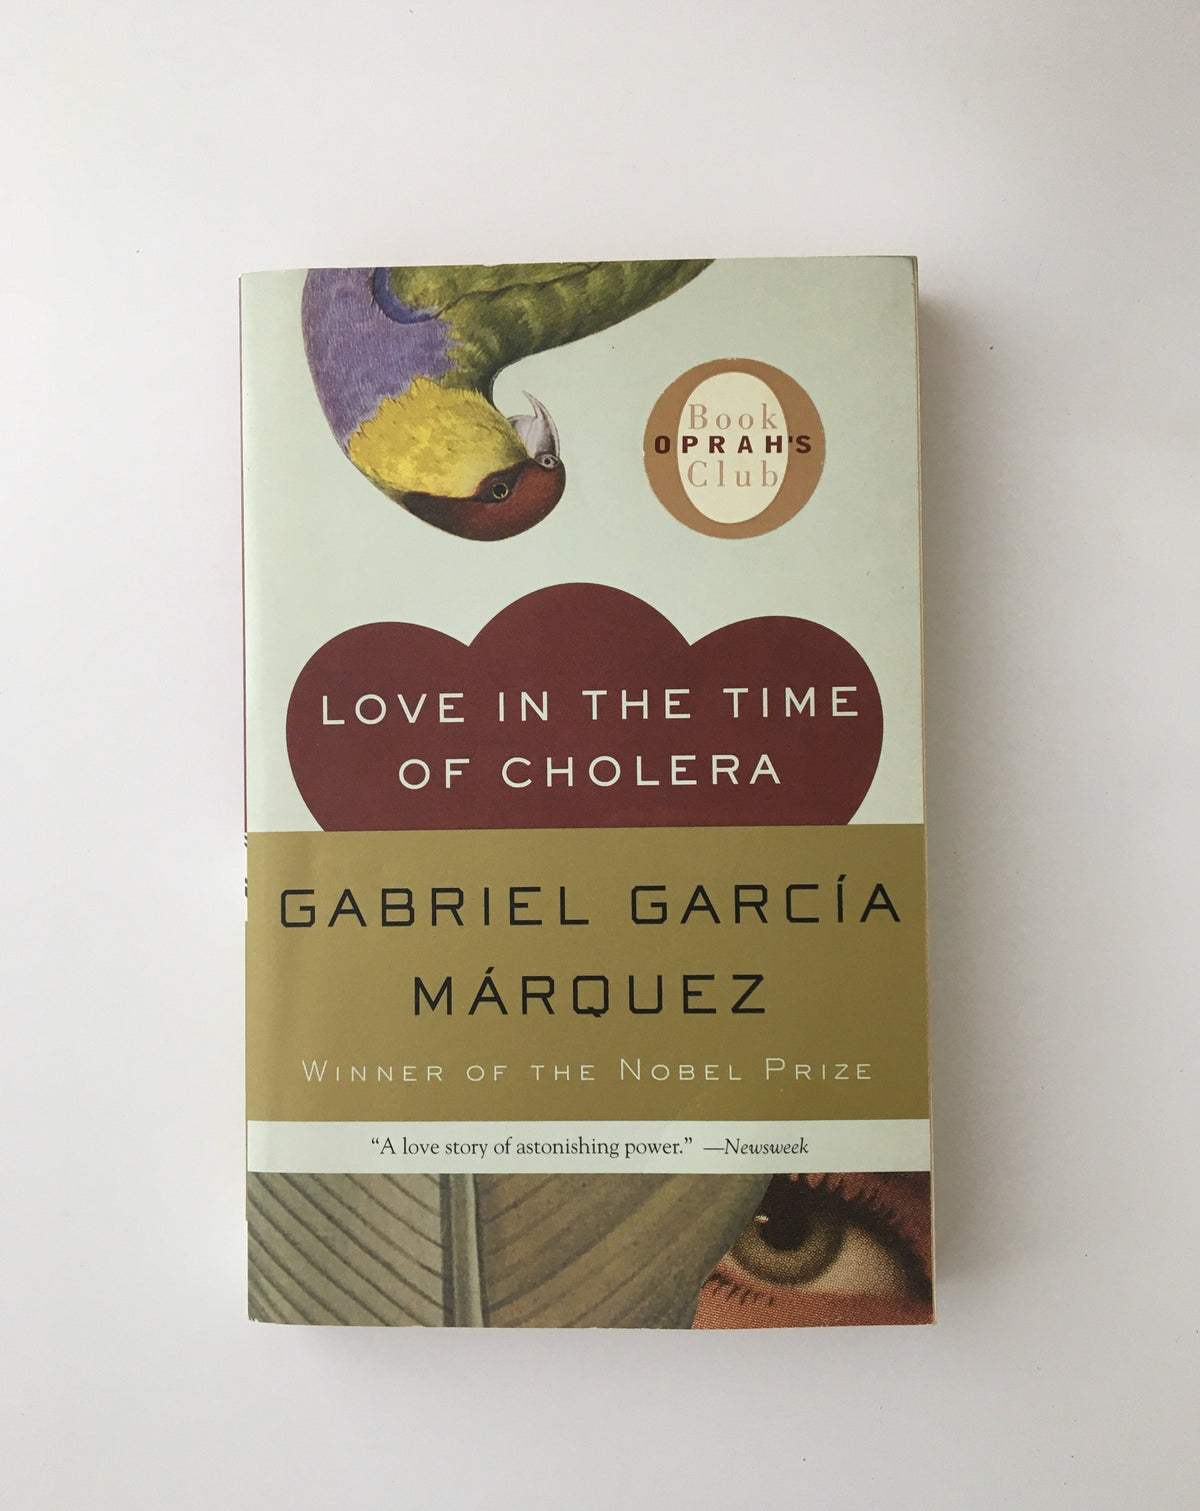 Donate: Love in the Time of Cholera by Gabriel Garcia Marquez